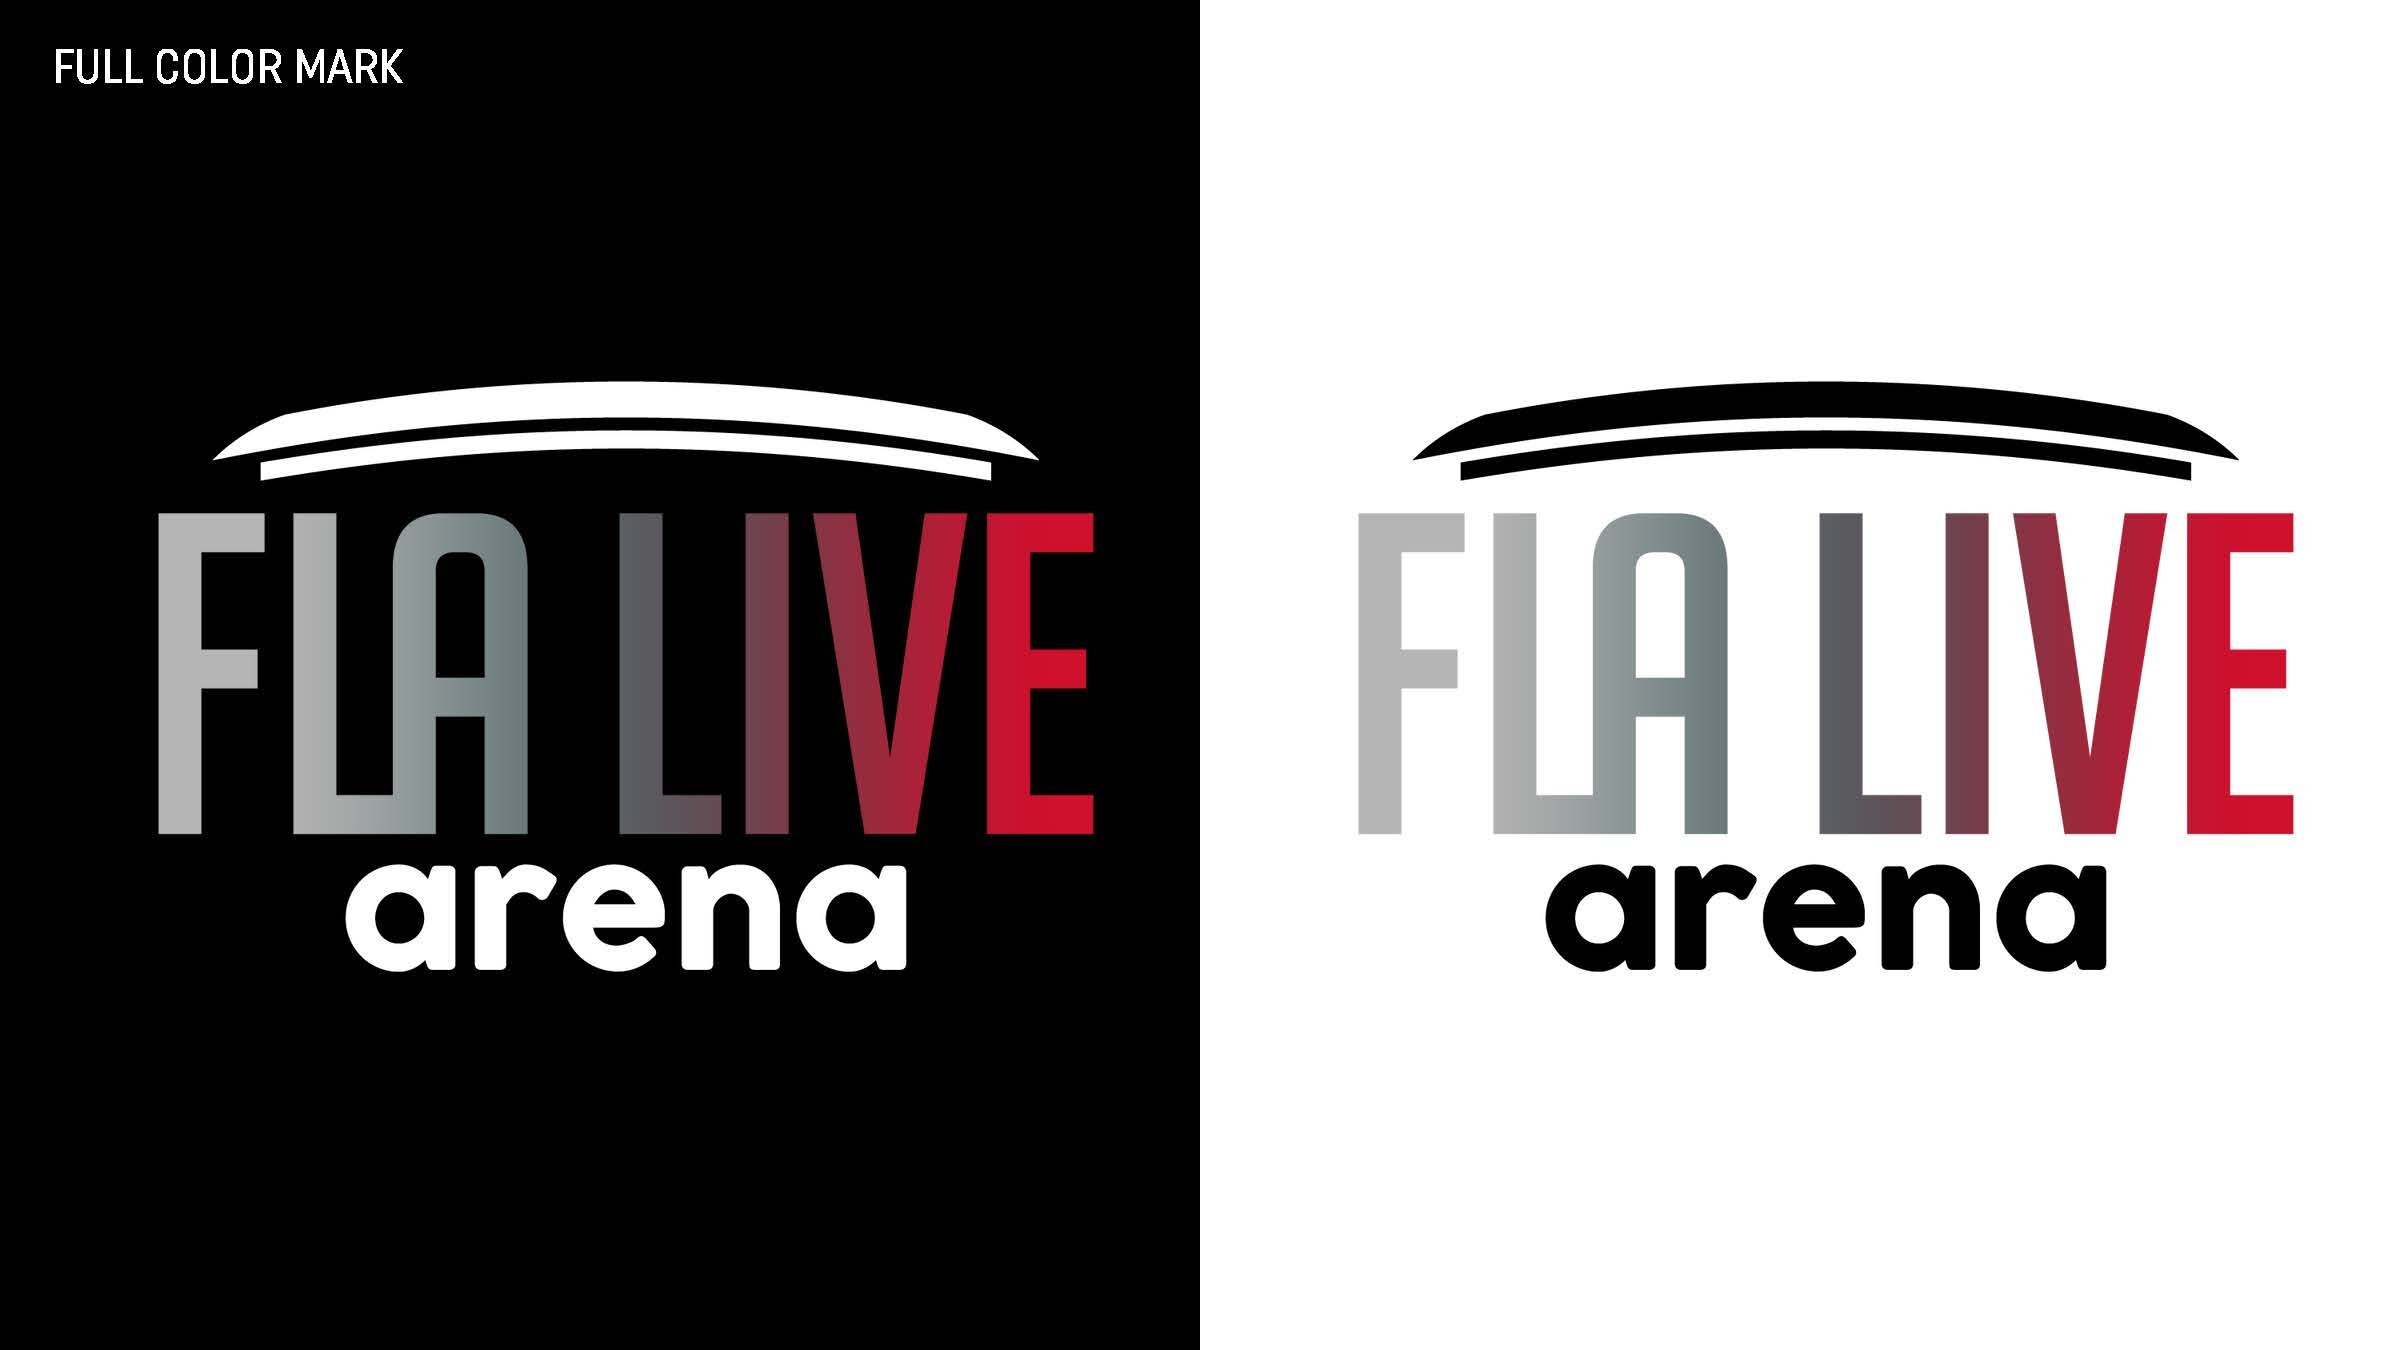 FLA LIVE ARENA Style Guide_Page_03.jpg